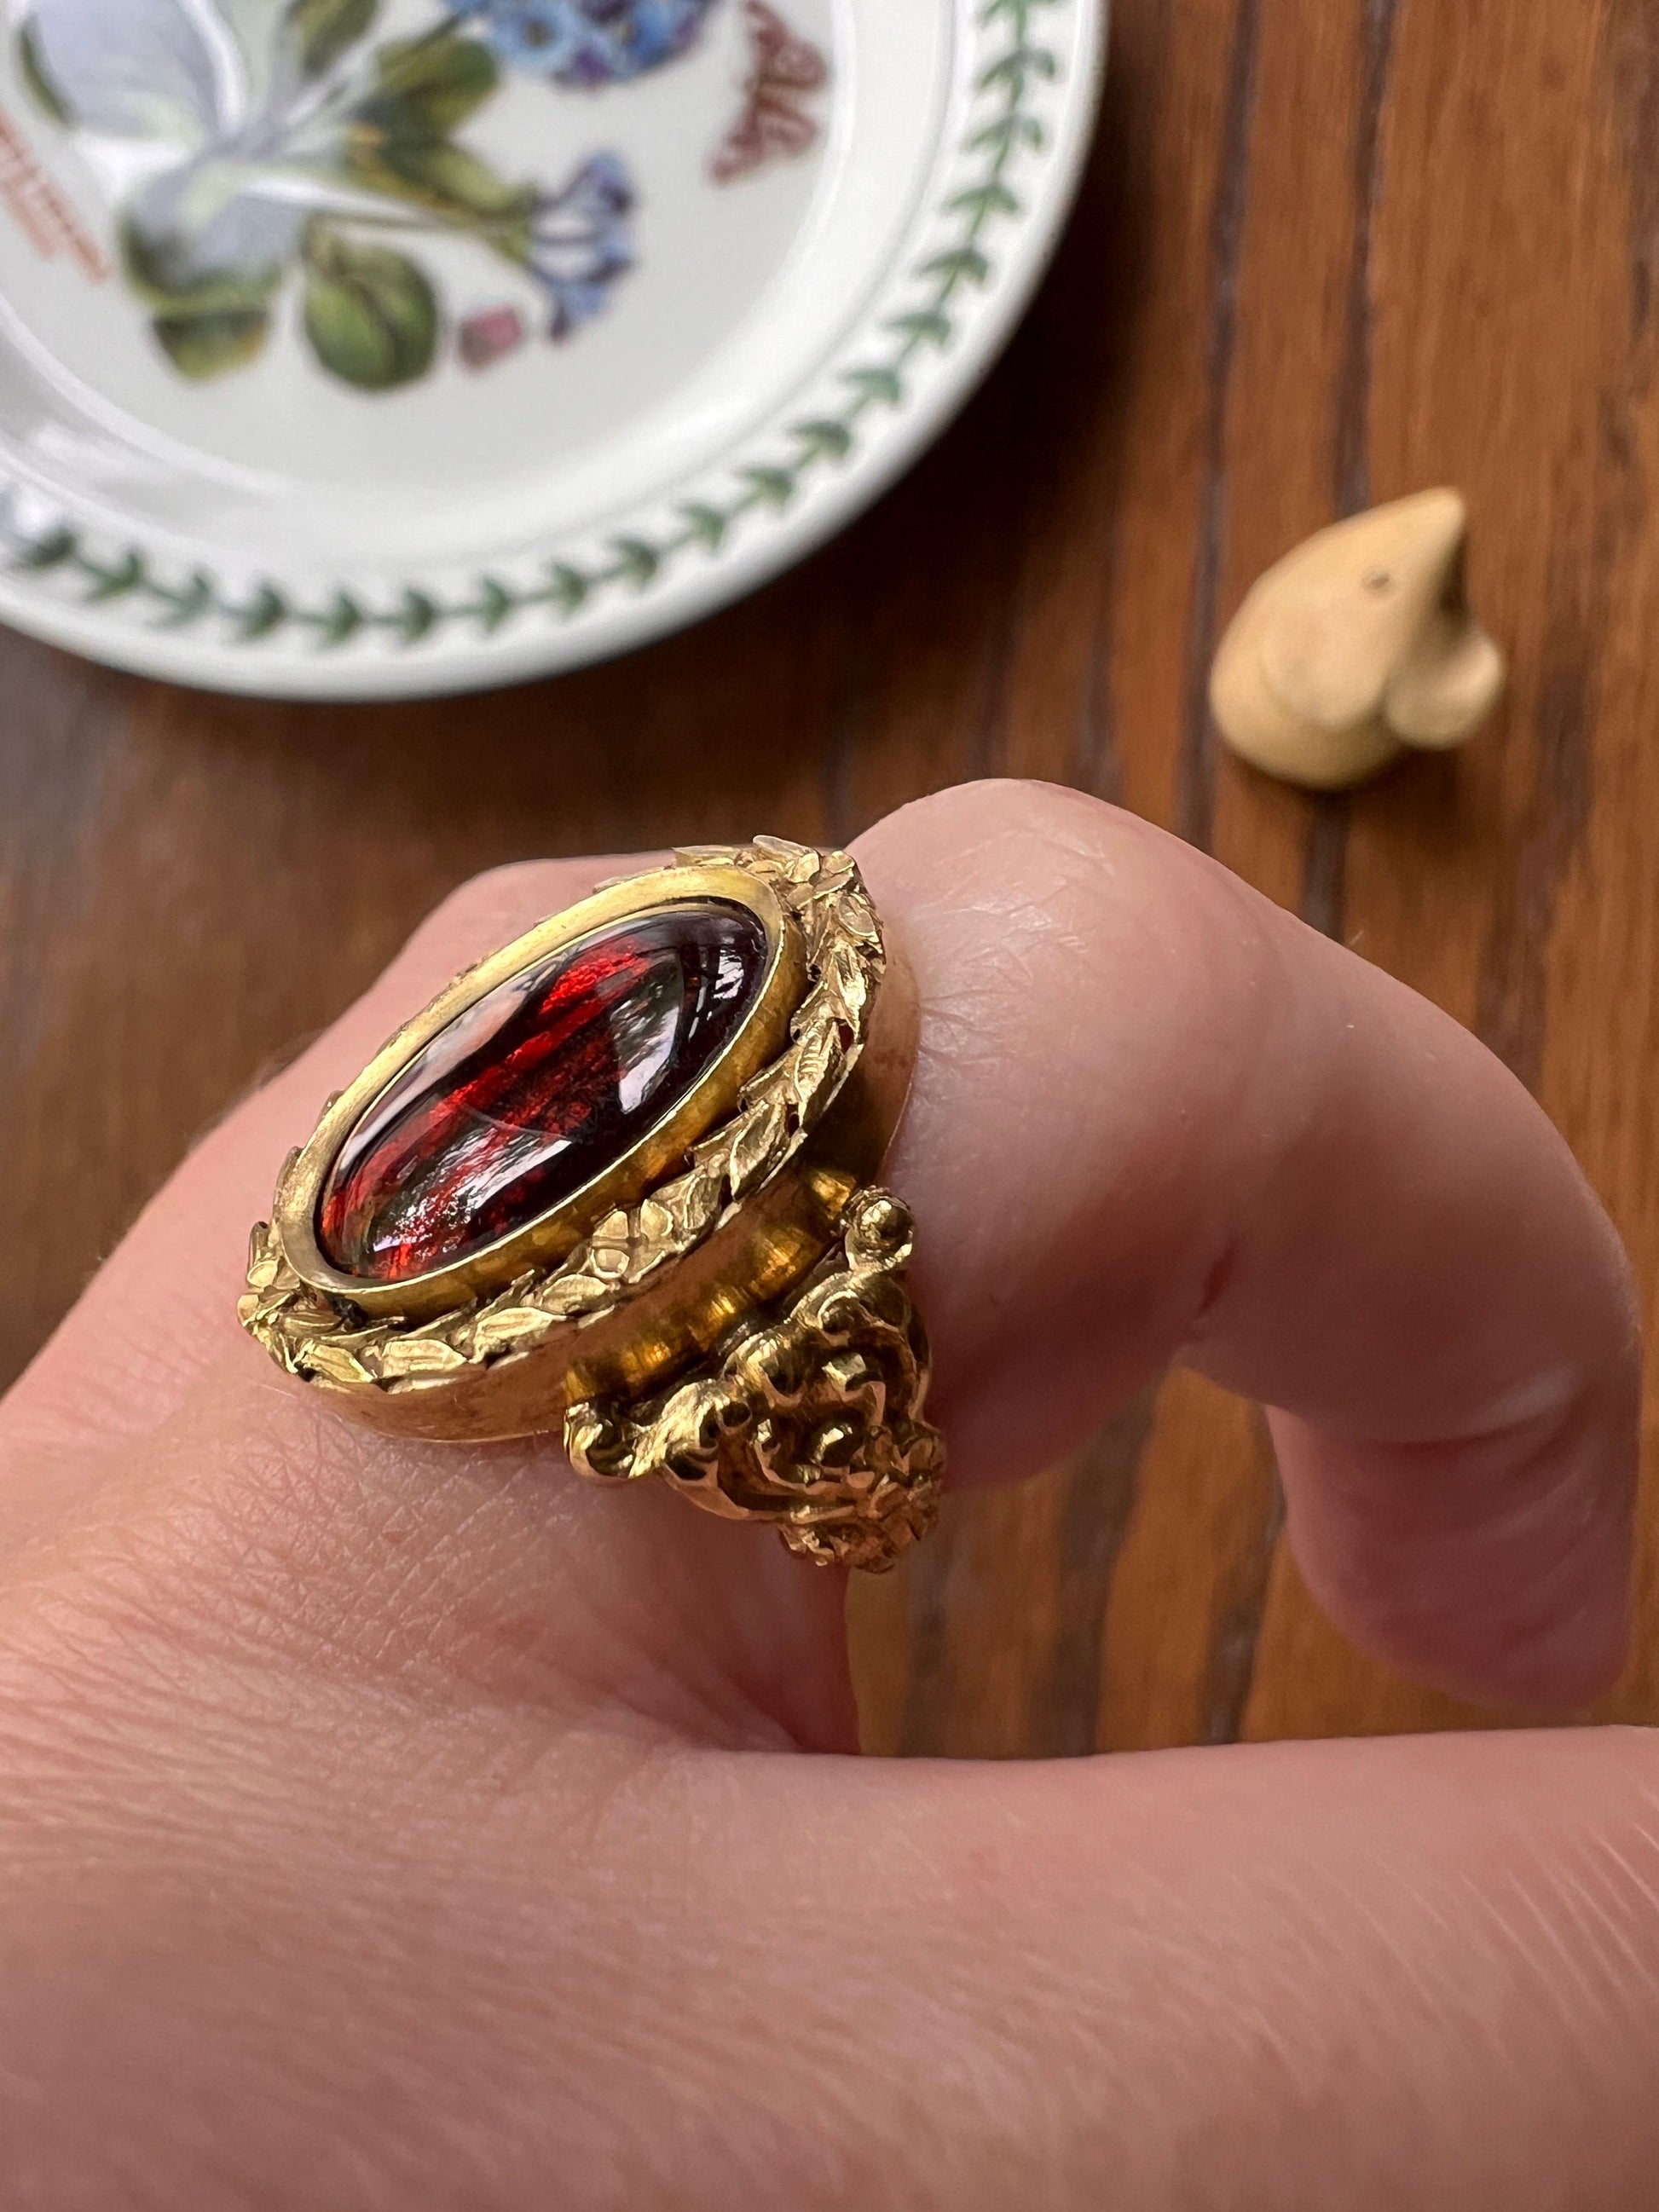 Floral GARLAND Antique FRENCH Enamel LIMOGES Portrait Ring 18k Gold Hand Painted Woman Portrait Metallic Red Signed Bonnadier Forget Me Not